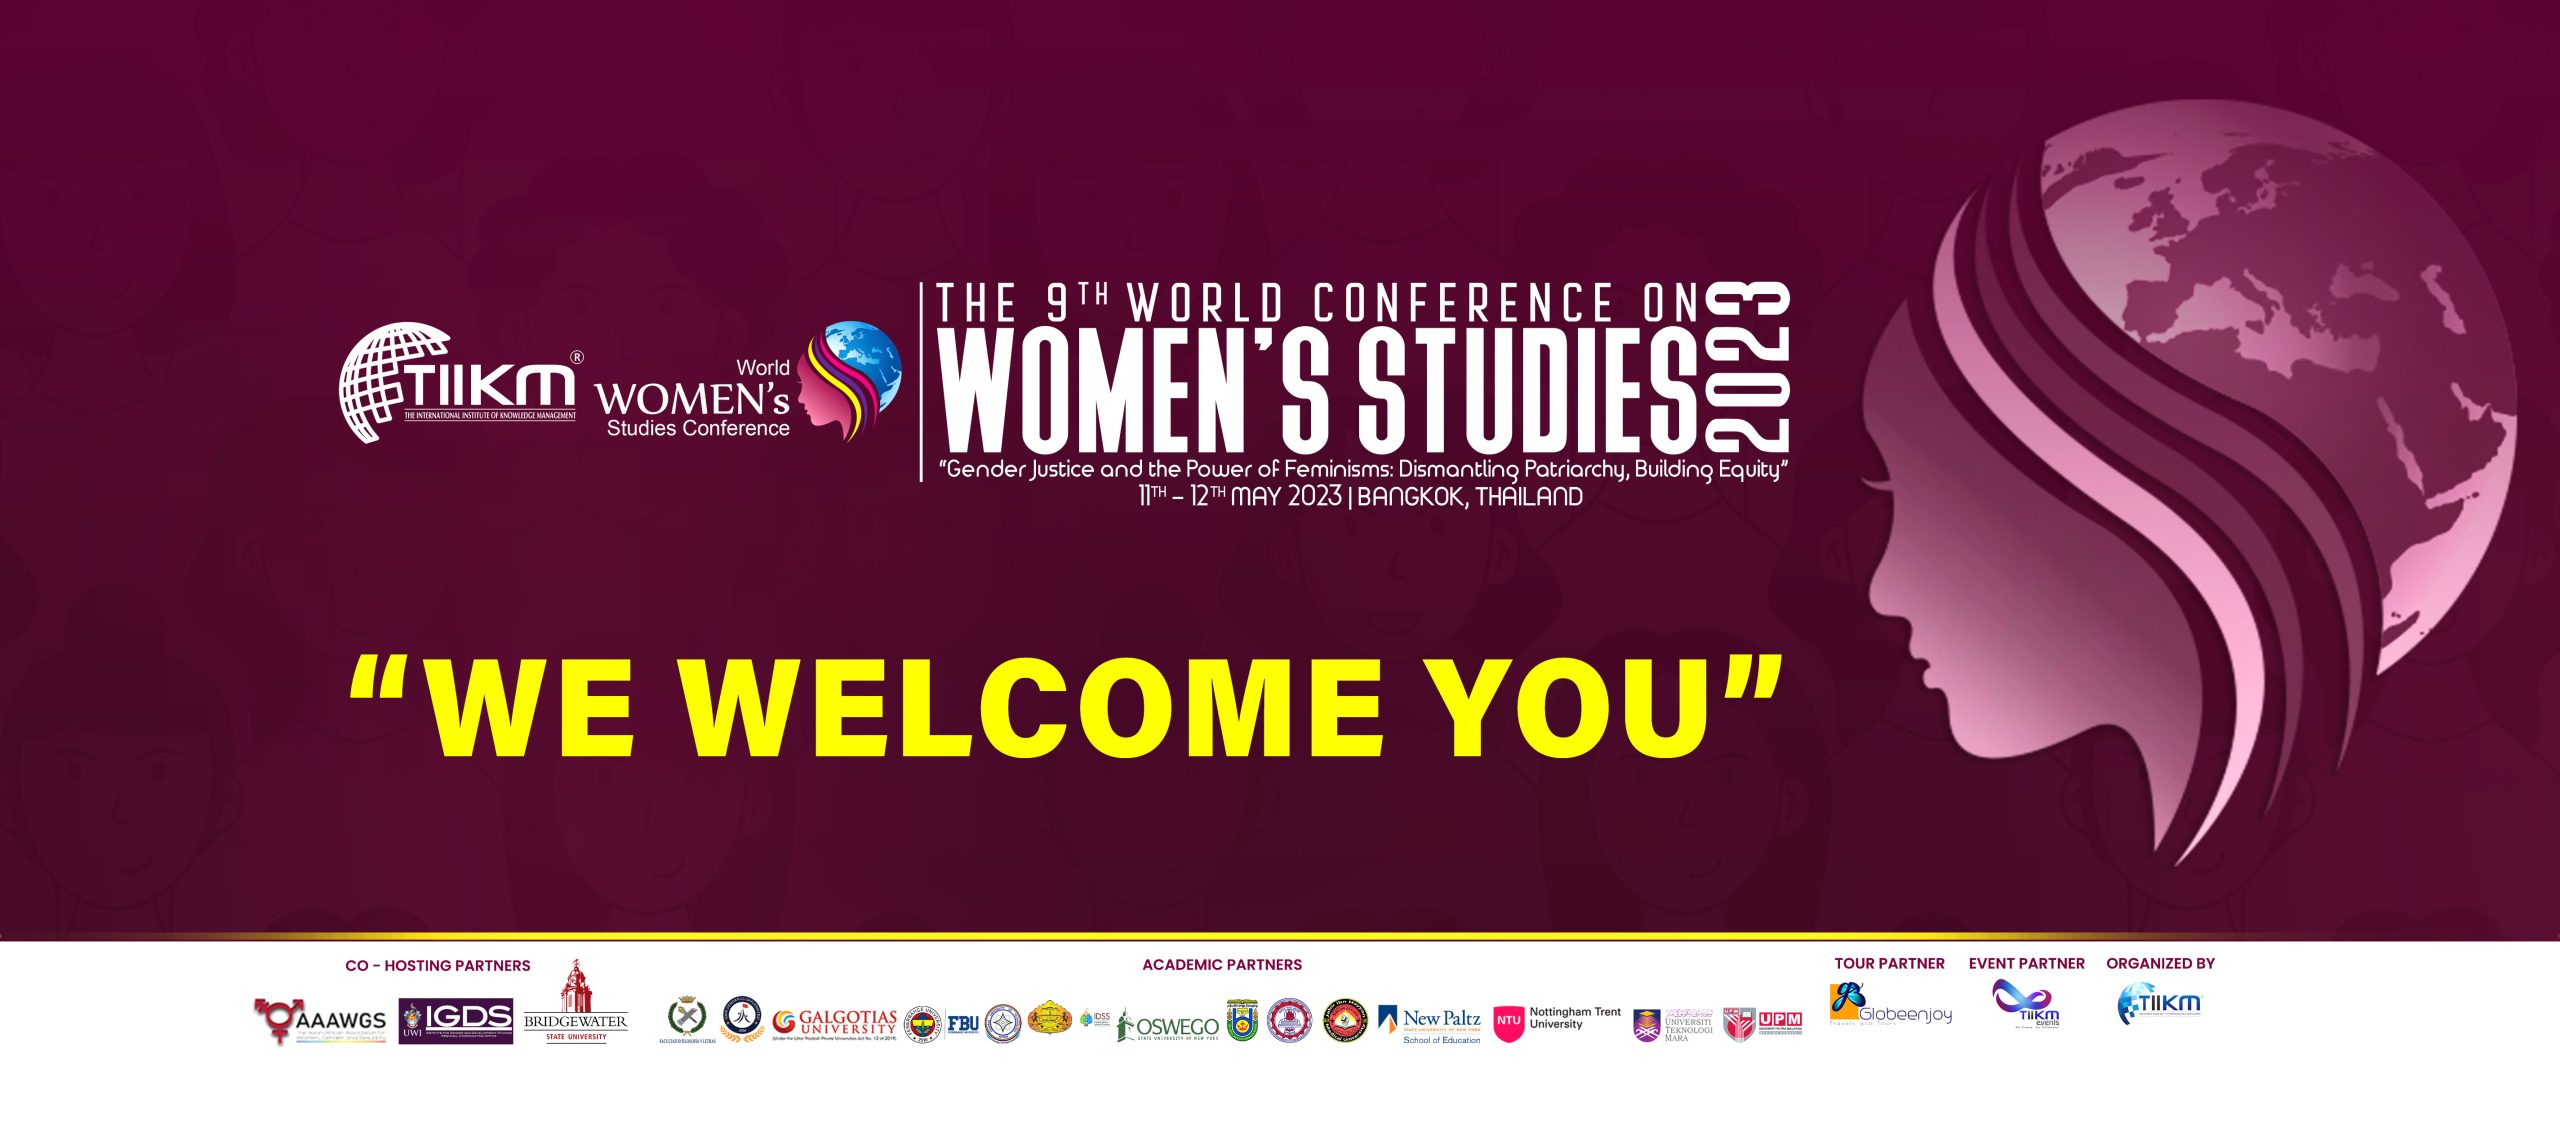 WCWS 2023 Facebook Cover The 10th World Conference on Women's Studies